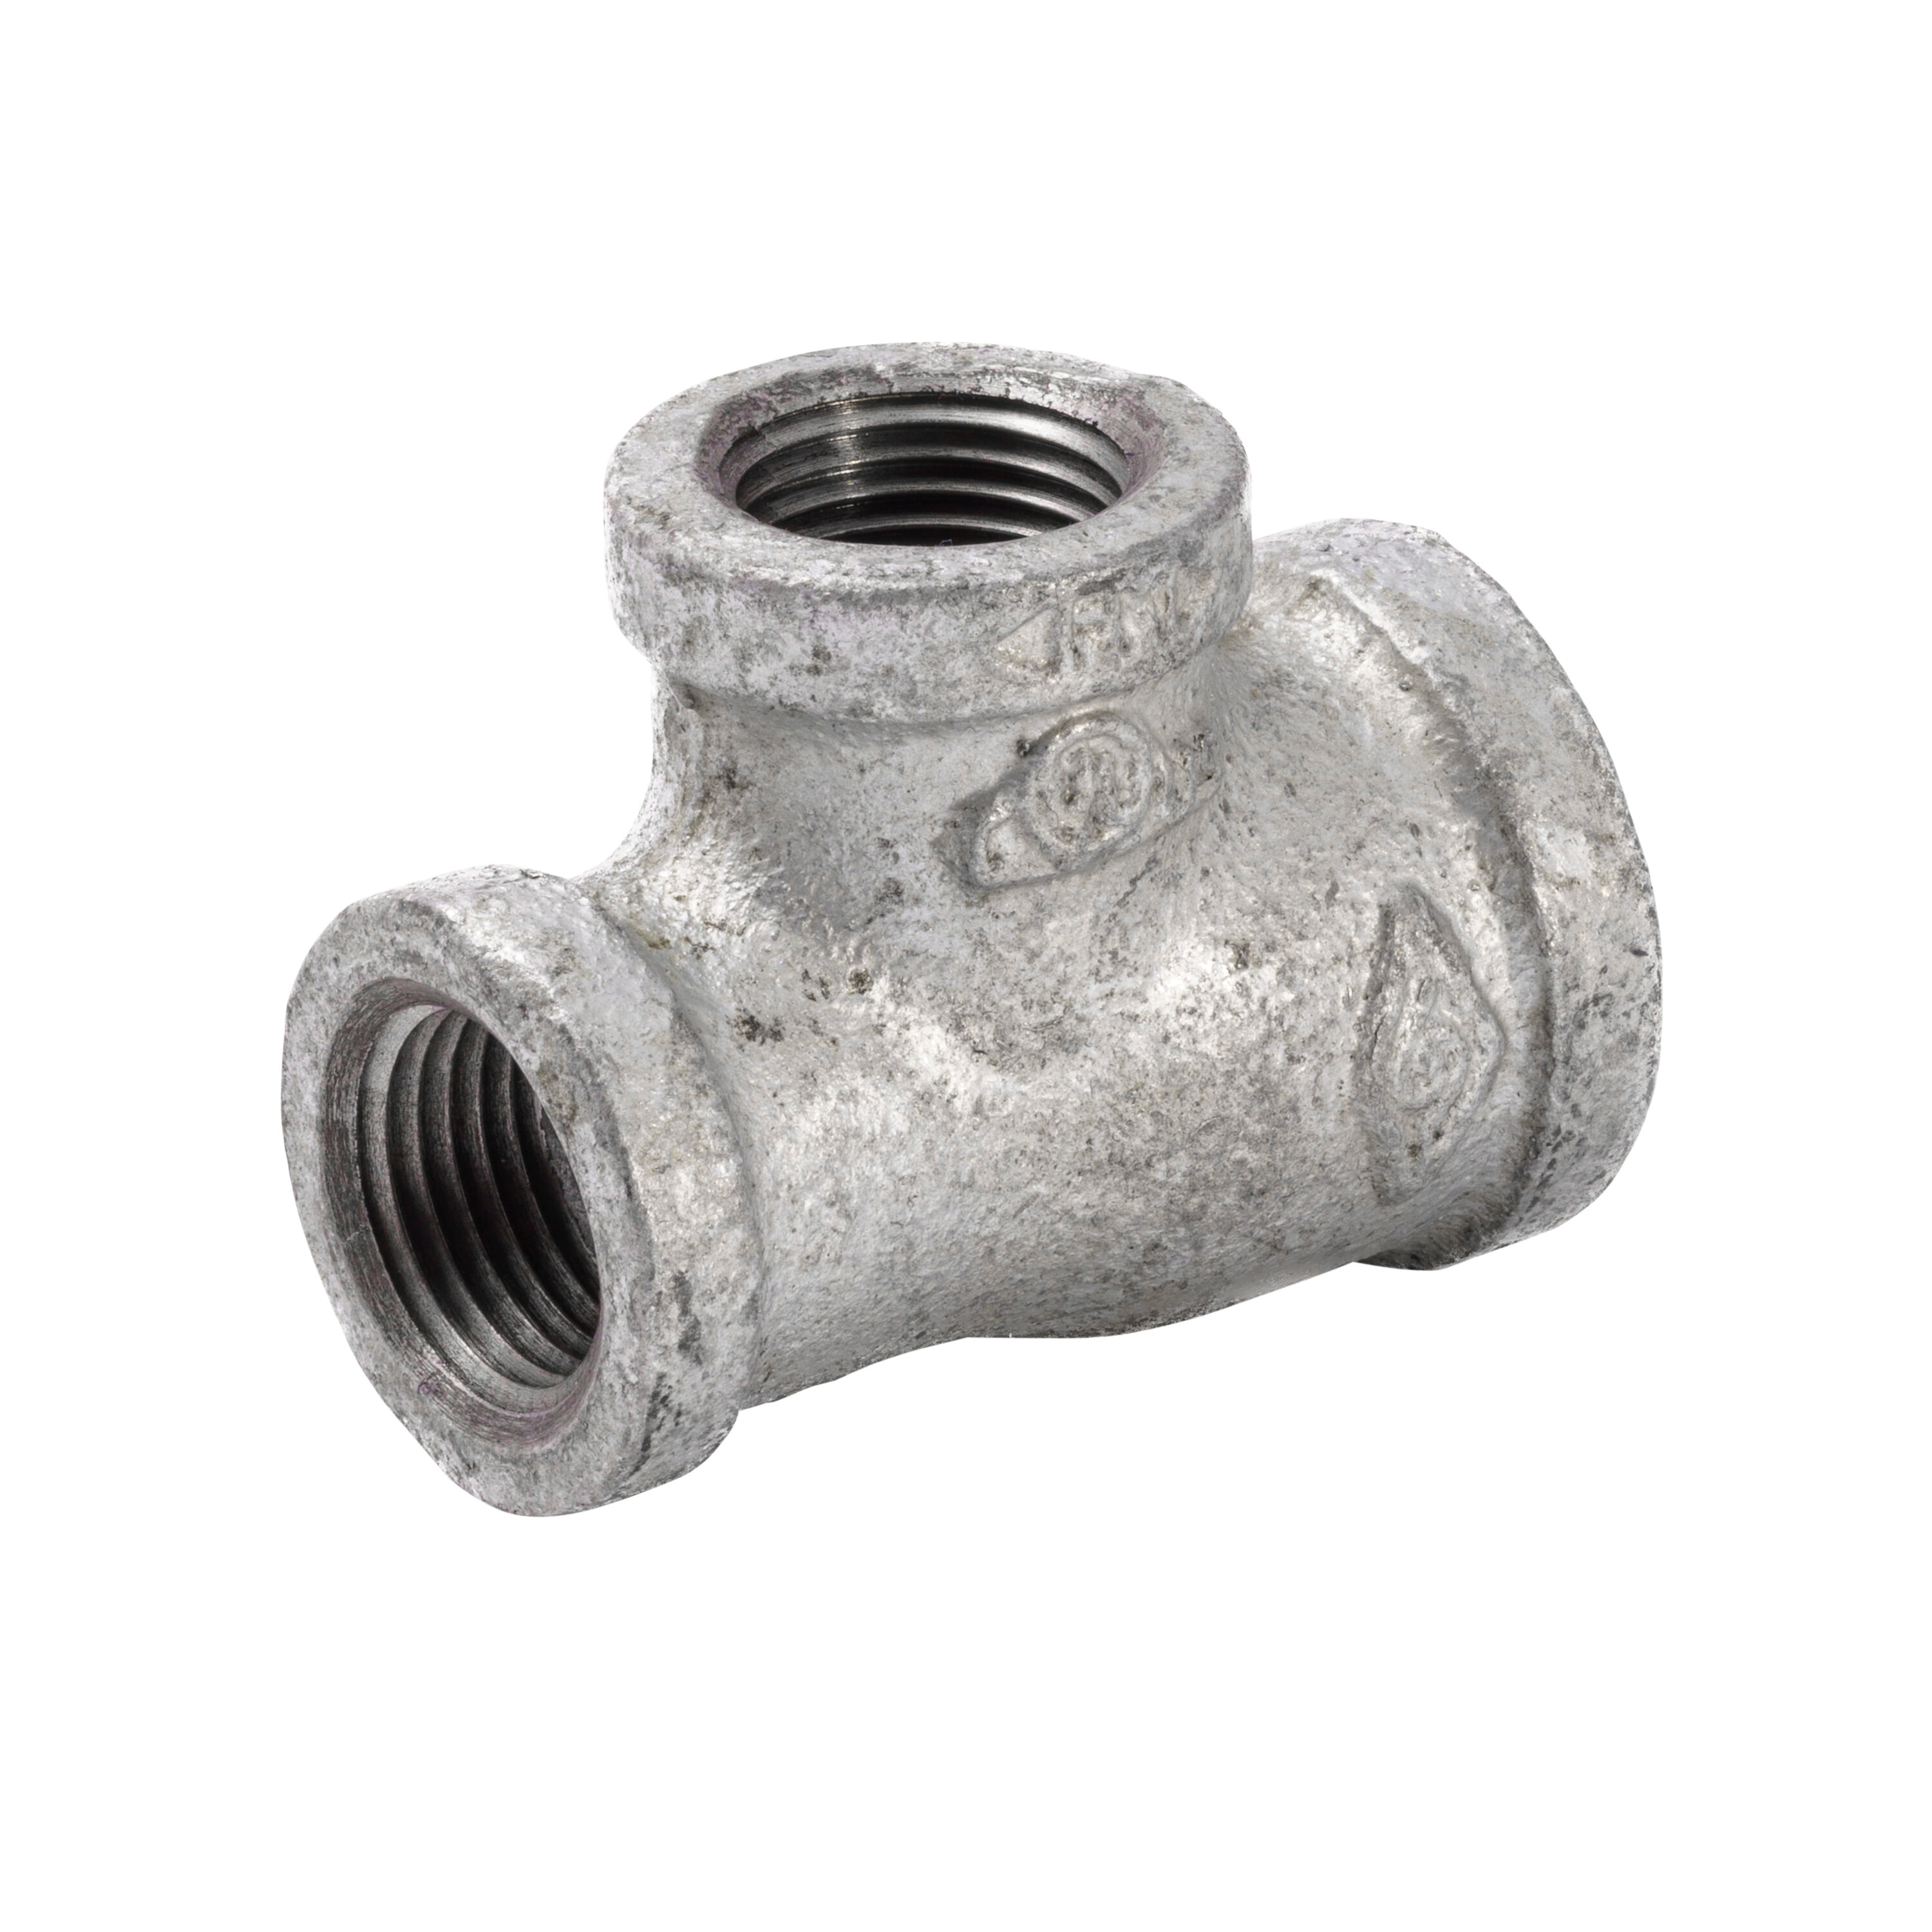 Tee Galvanized Pipe & Fittings at